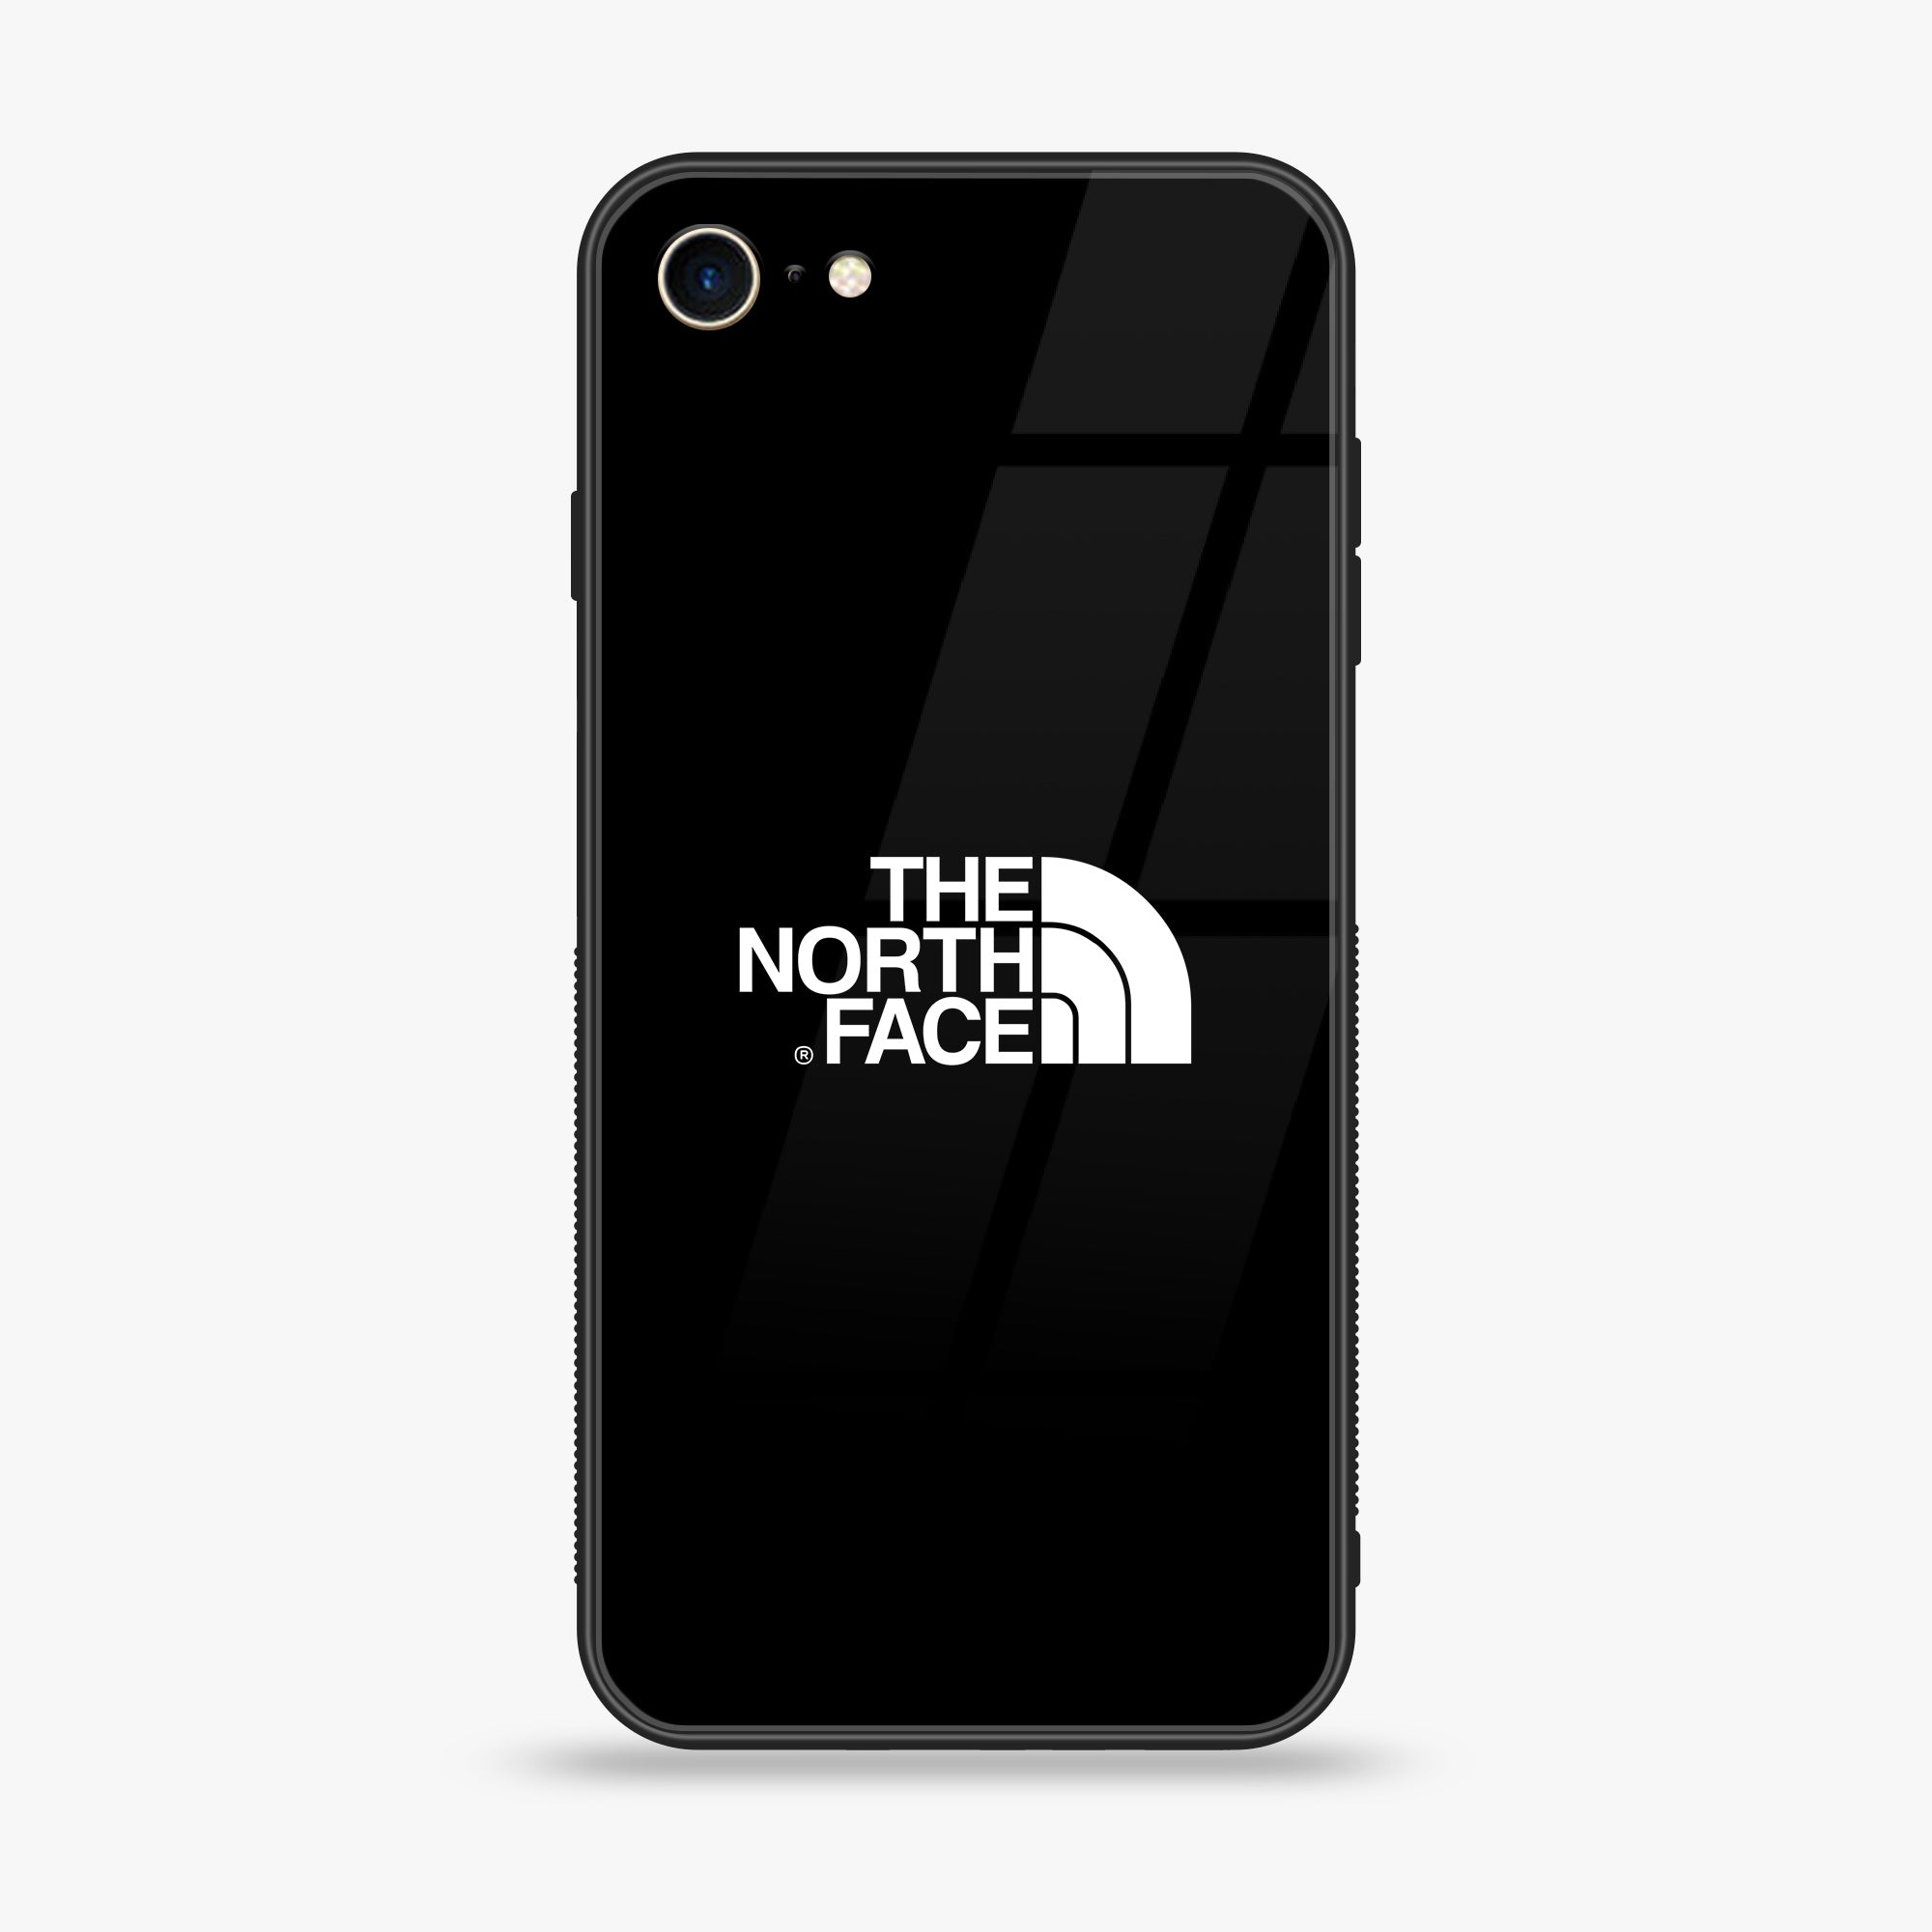 iPhone SE 2020 - The North Face Series - Premium Printed Glass soft Bumper shock Proof Case